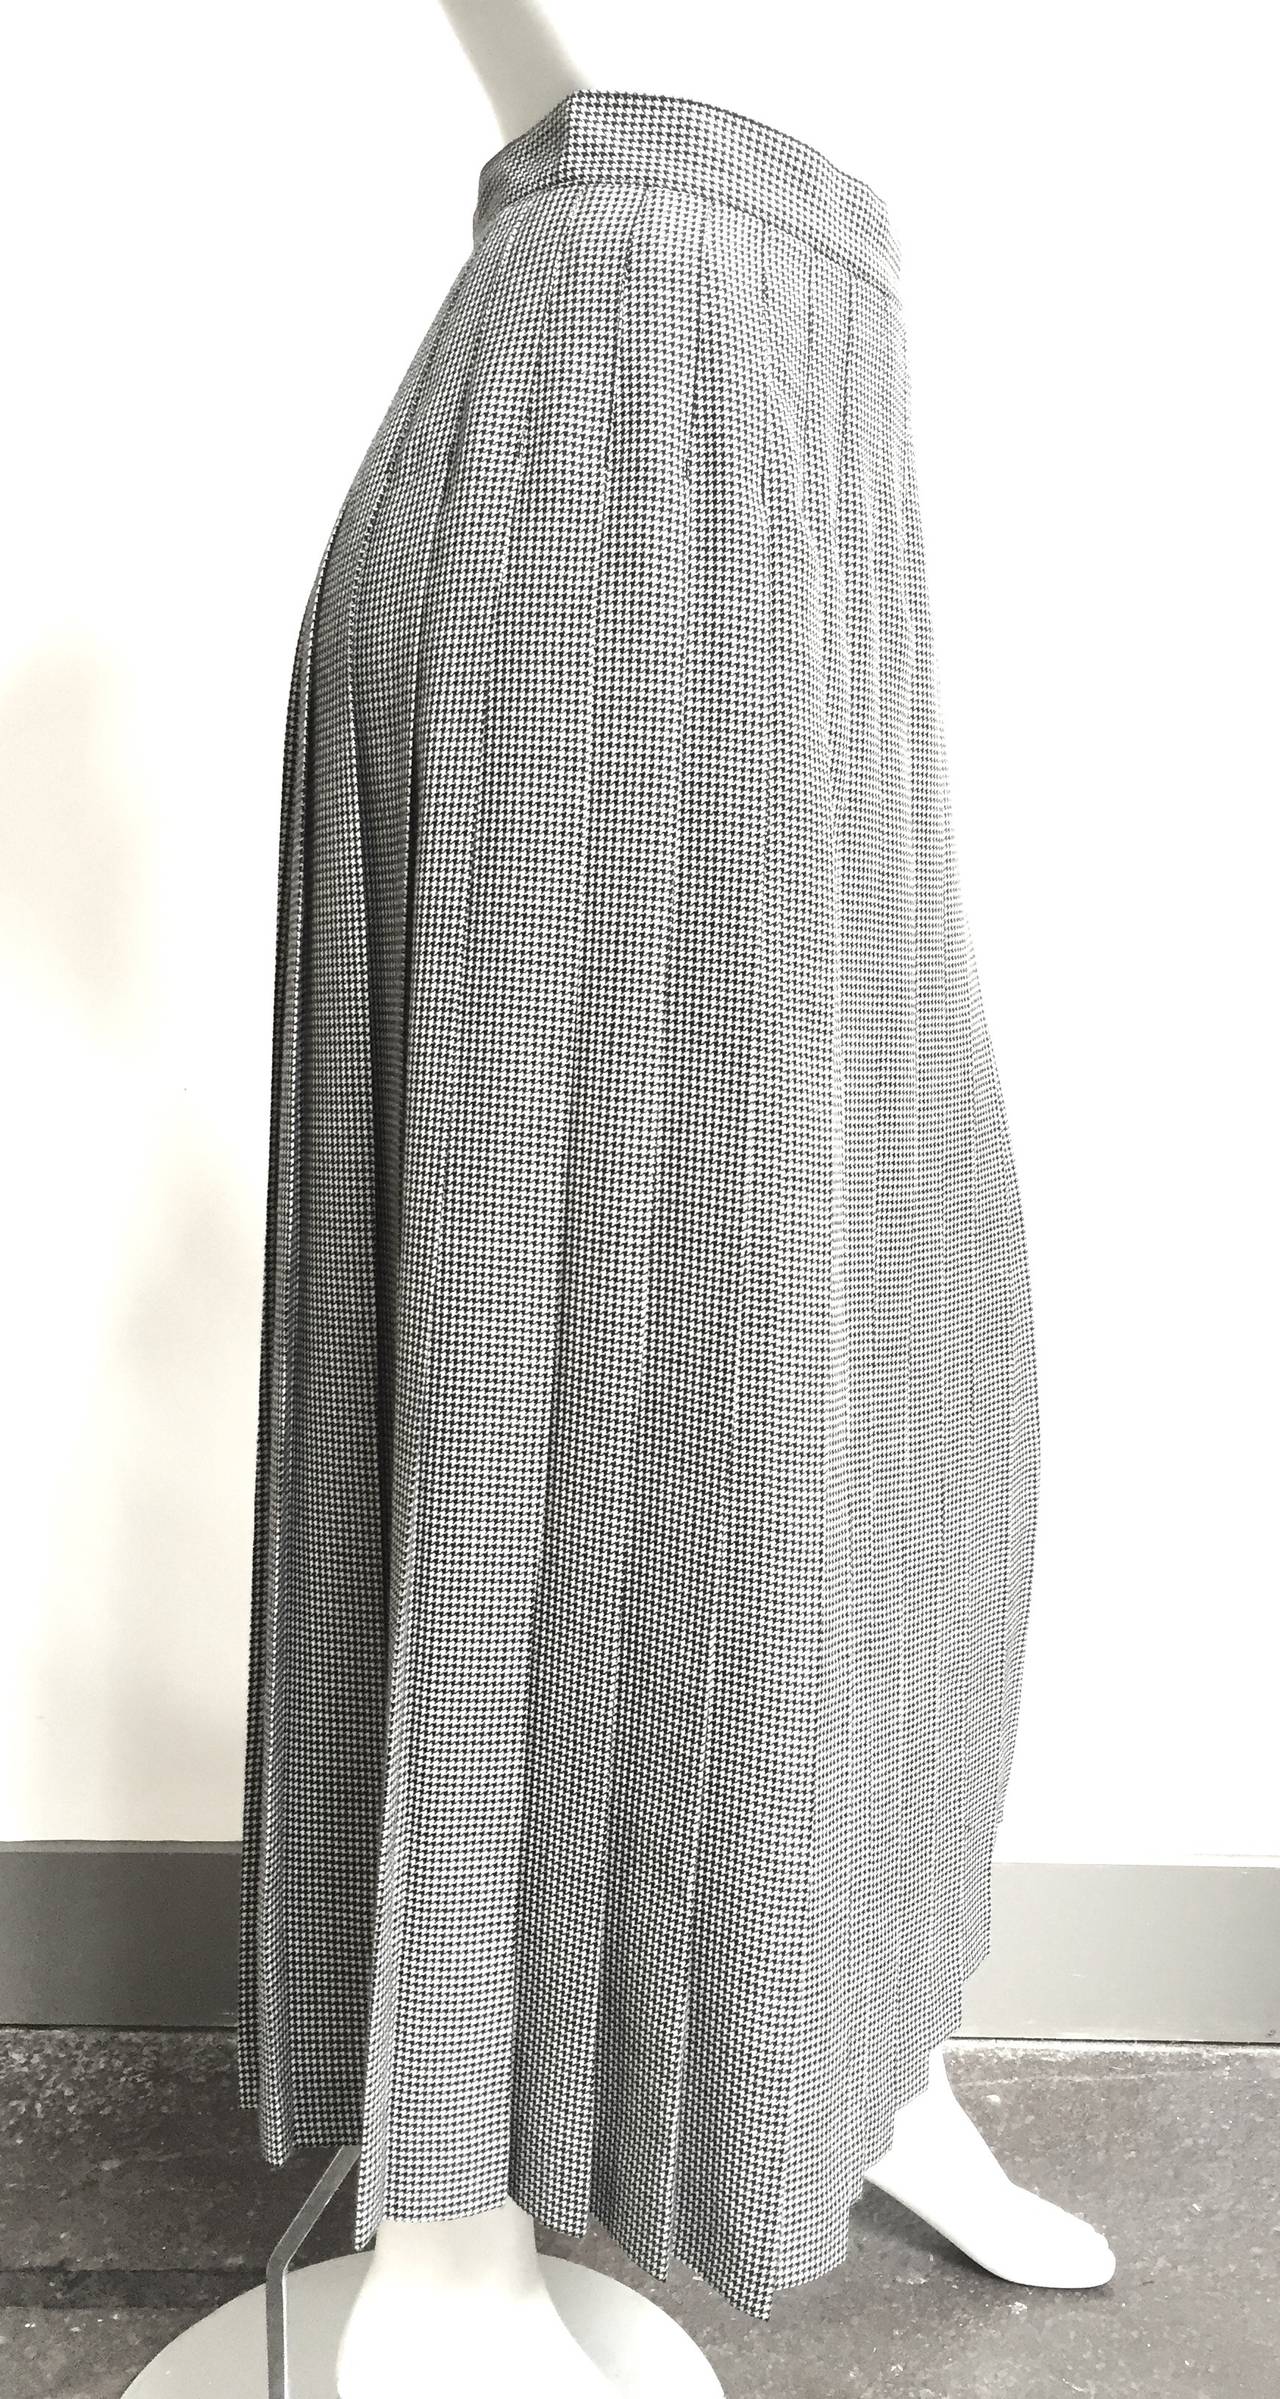 Christian Dior 1980s wool blend long houndstooth pleated skirt is a USA size 4. Classic houndstooth pattern is perfect for just about any occasion especially when worn with your vintage Celine blouse. Skirt is not lined.
Measurements are:
27"